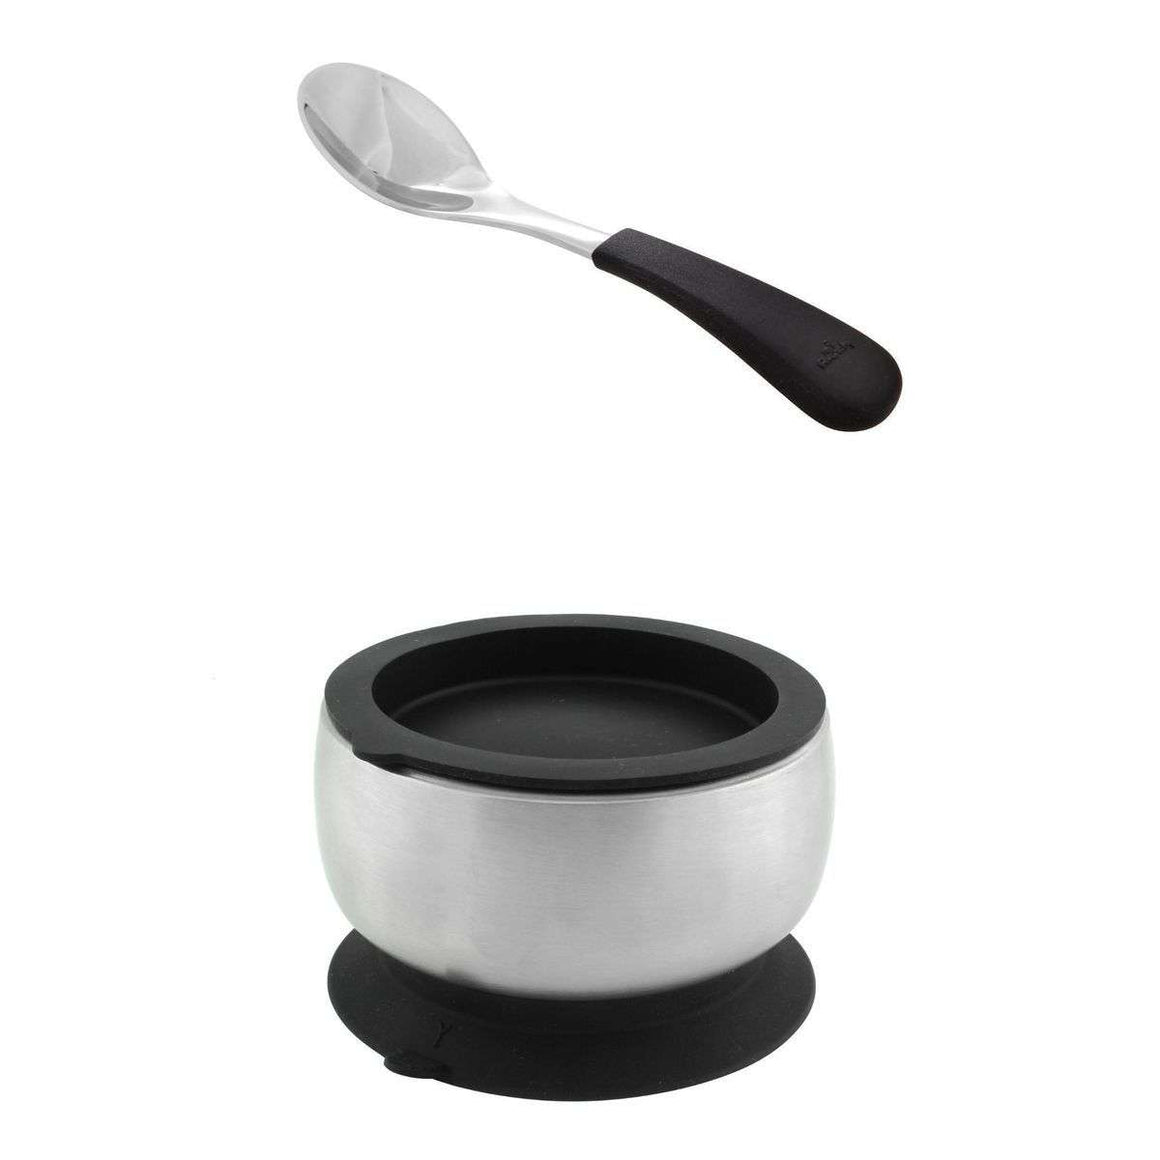 Avanchy Stainless Steel Baby Bowl + Spoon + Airtight Lid (Black)